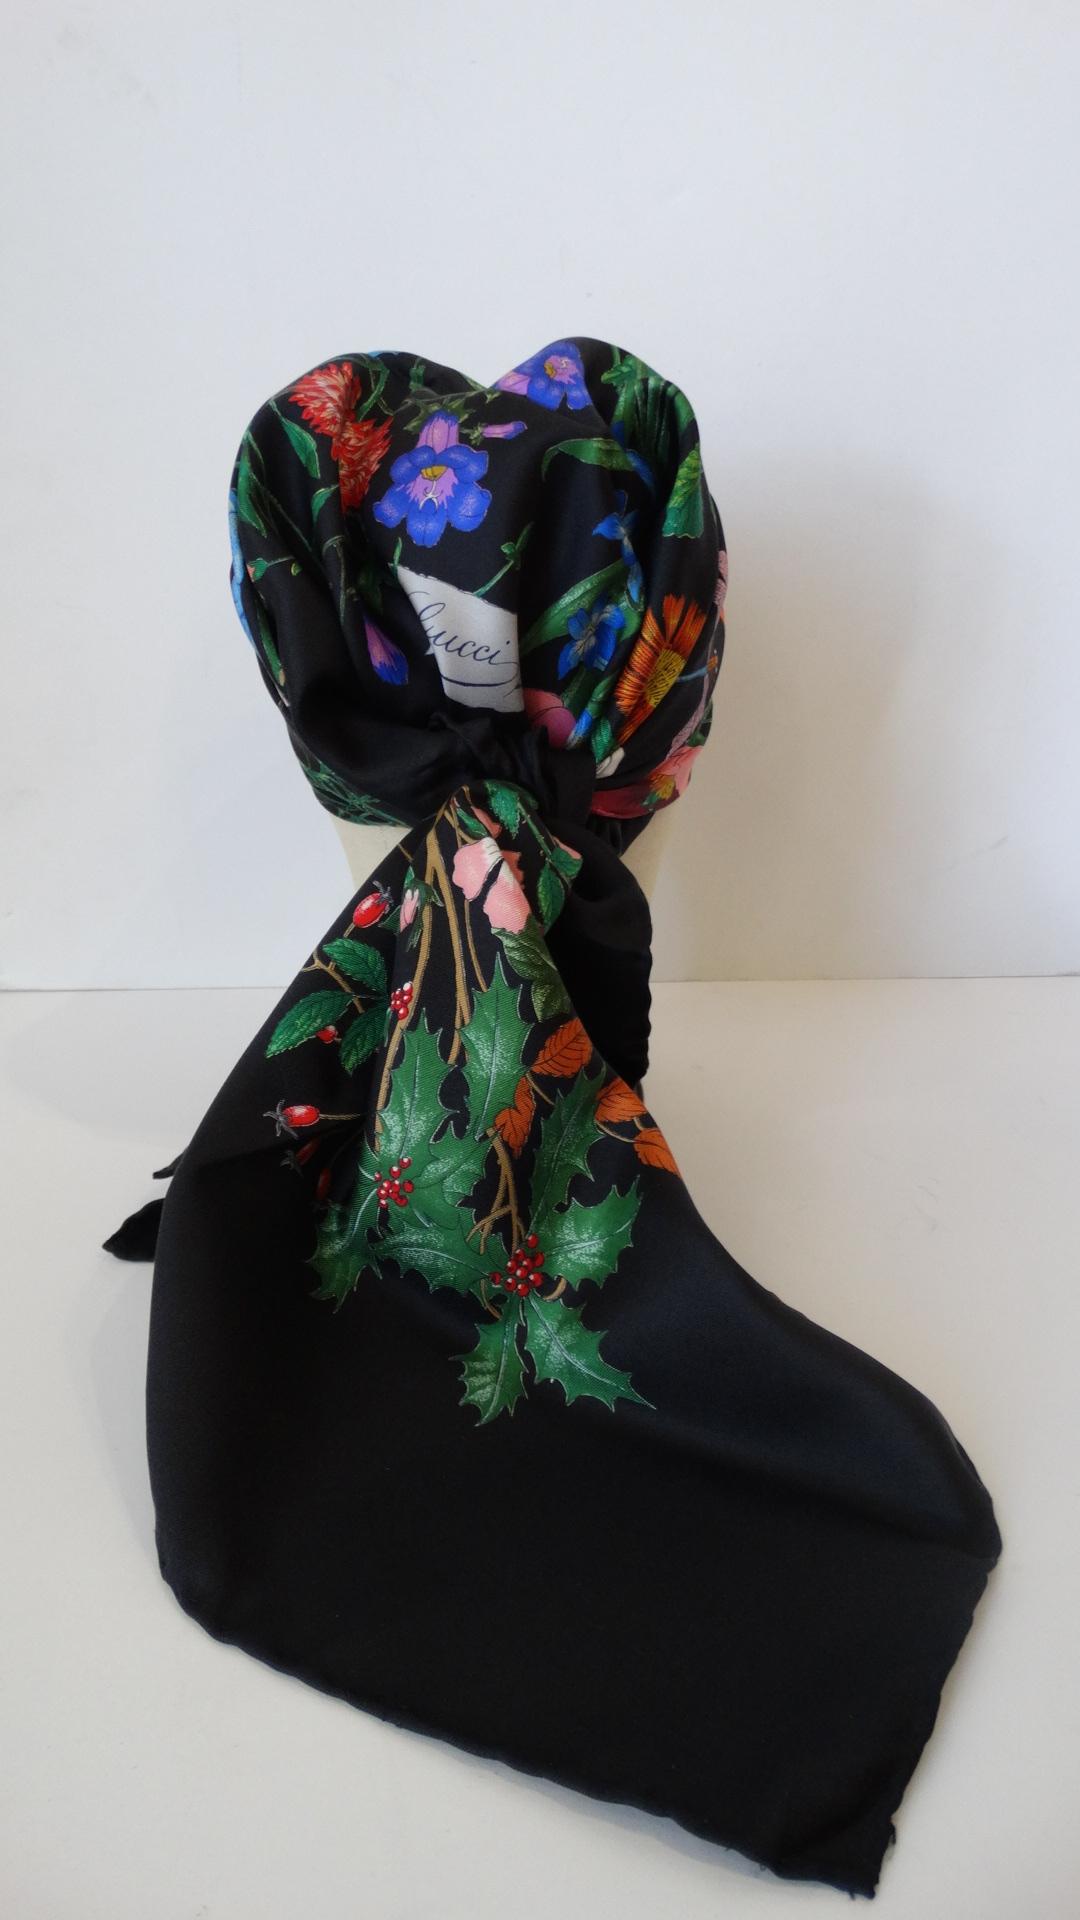 Who doesn’t love a little vintage Gucci Flora? Incredible black silk scarf printed with Gucci’s signature multicolored “Flora” floral print! “Gucci” printed in cursive in the bottom corner of the flowers. The size of this scarf allows for a number